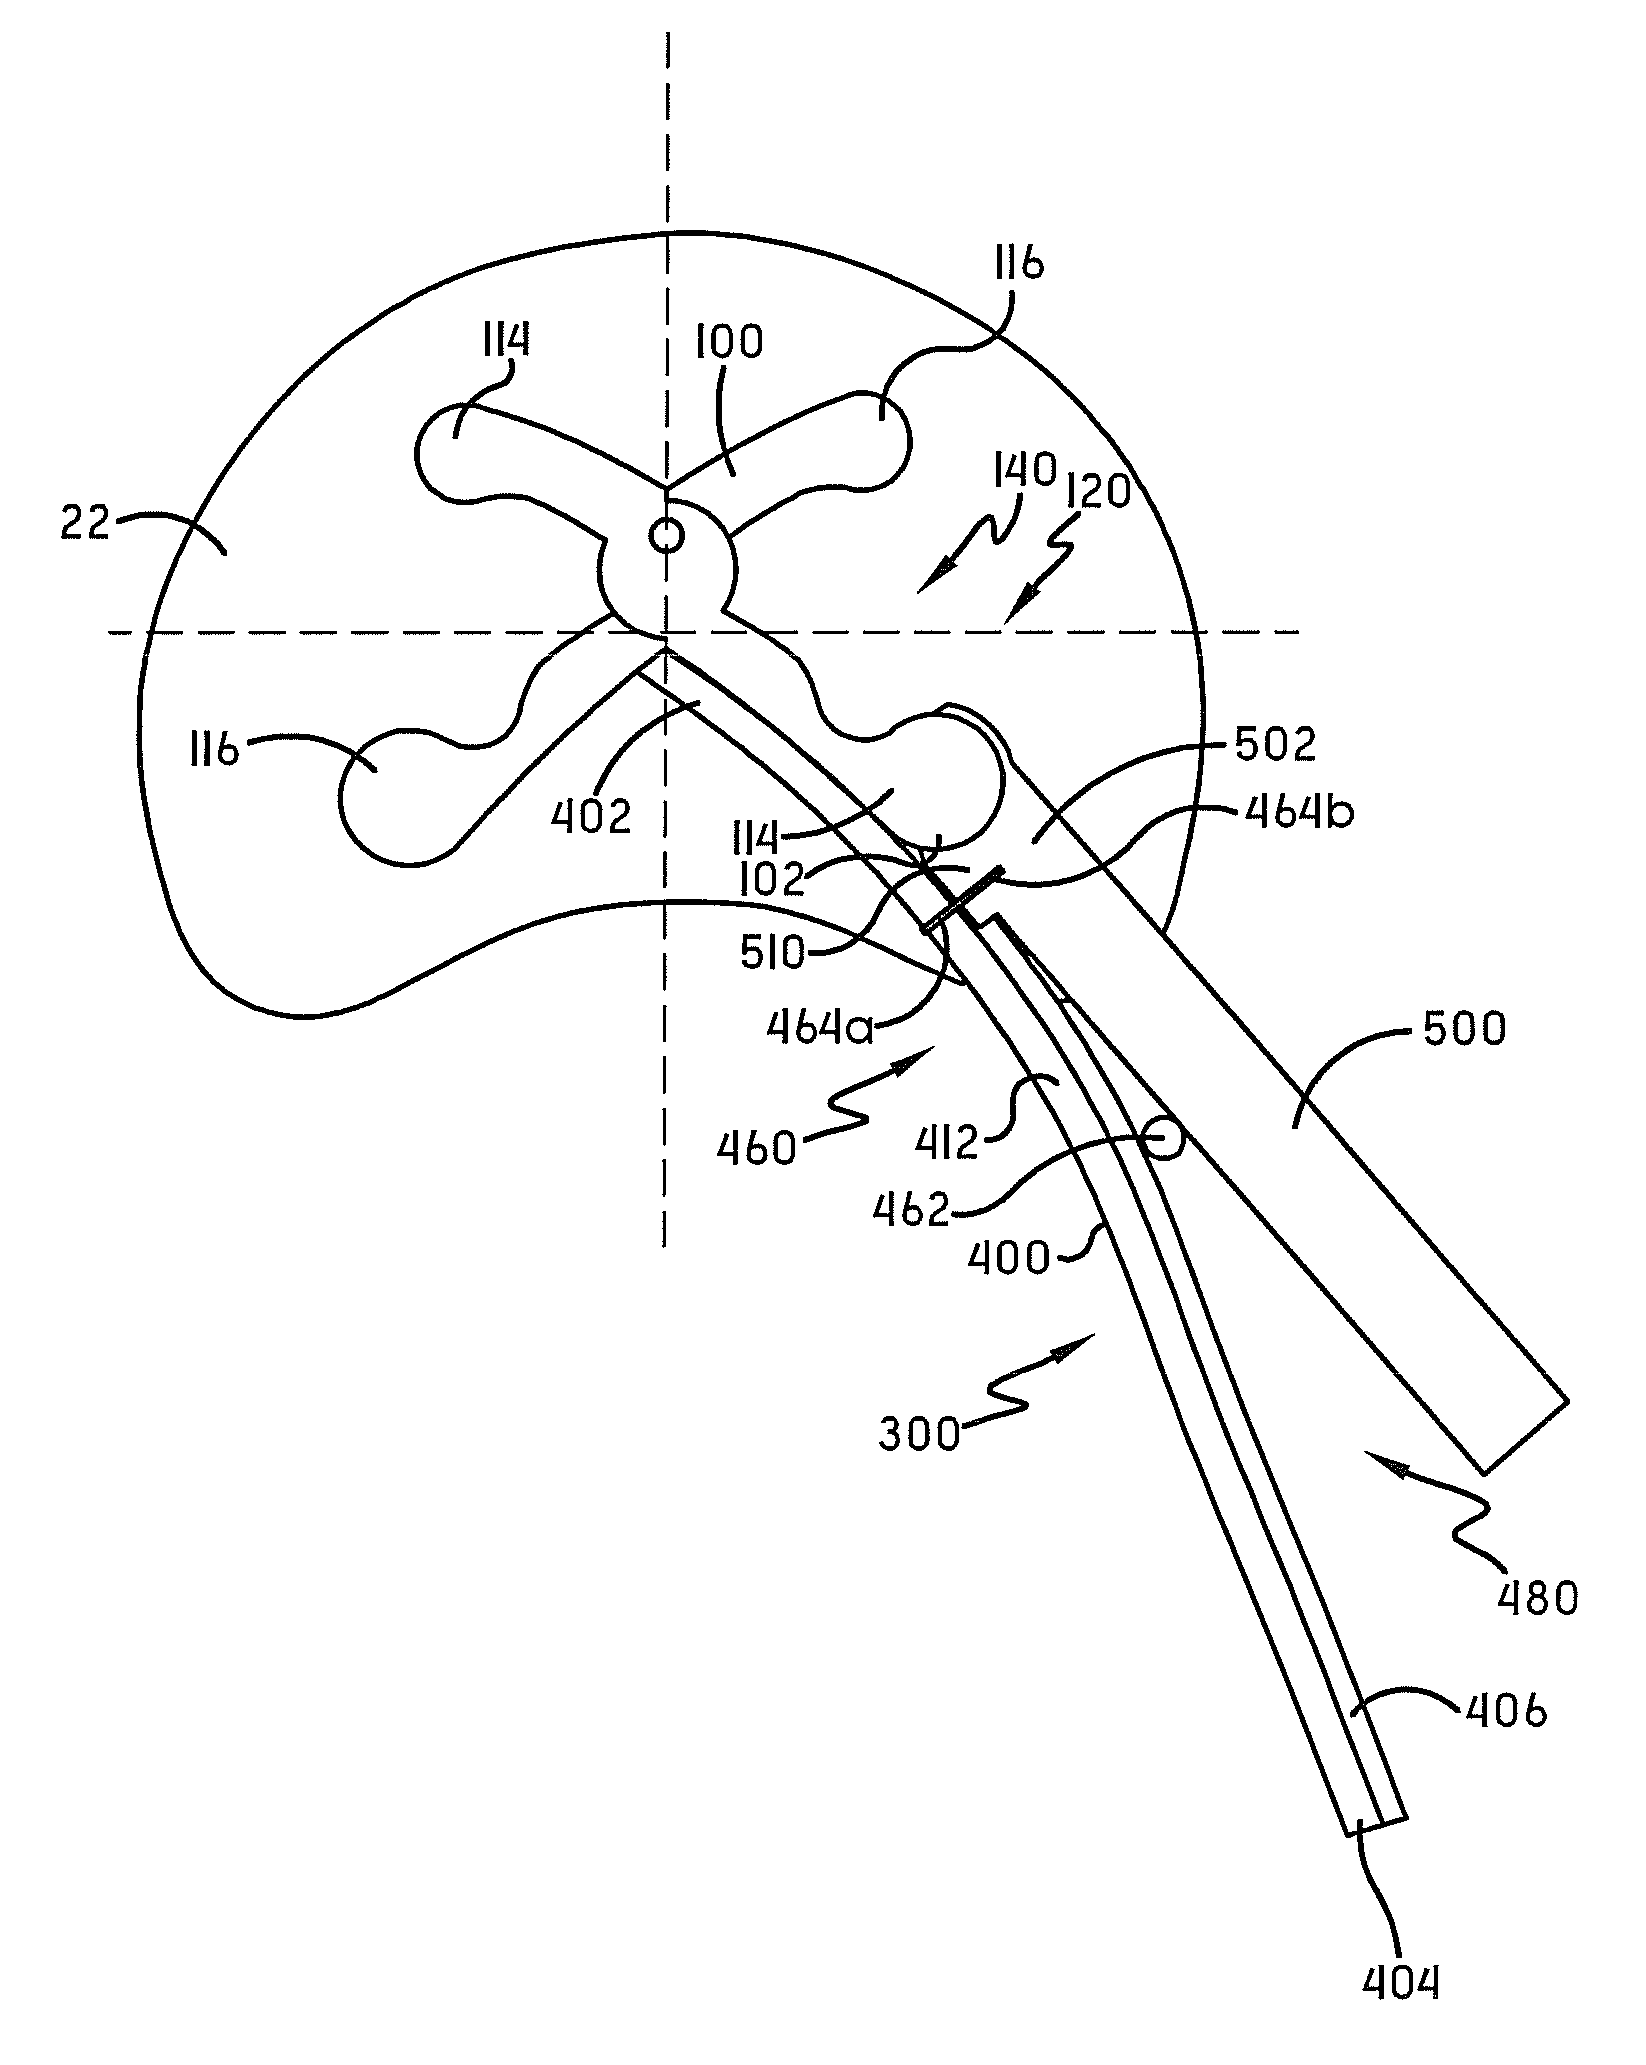 Spine surgery method and instrumentation